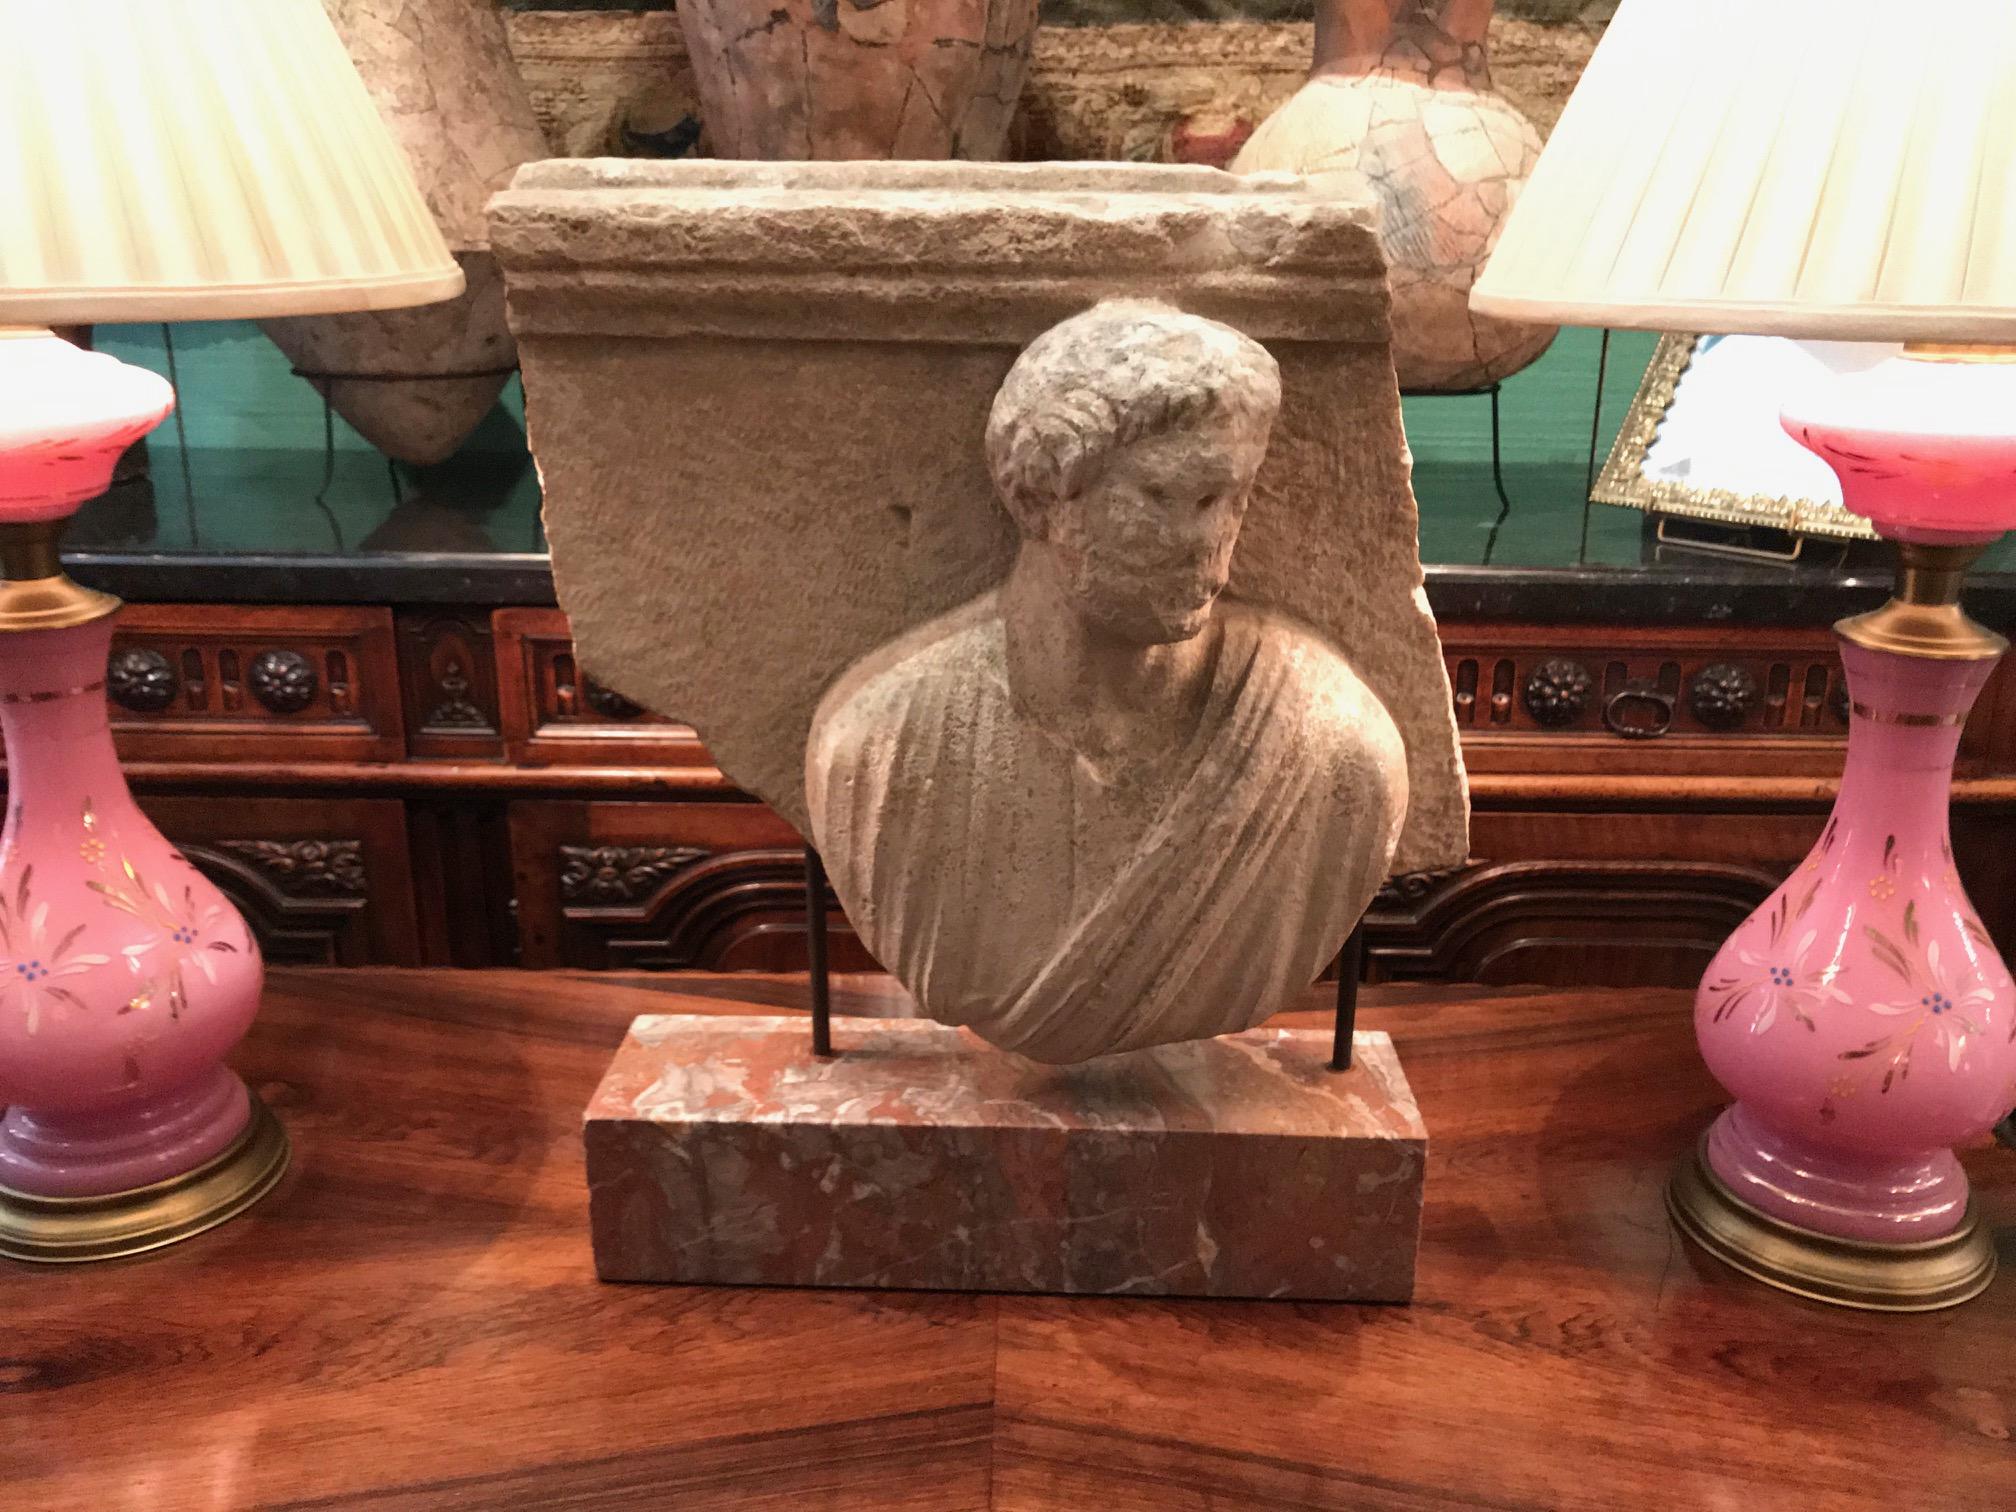 ------ Short time sale on this important item --------
Large and rare 2nd century Italian hand carved stone sculpture Roman relief of an Aristocrat man mounted Antiques LA Private collector. This piece will be the signature to your entryway office